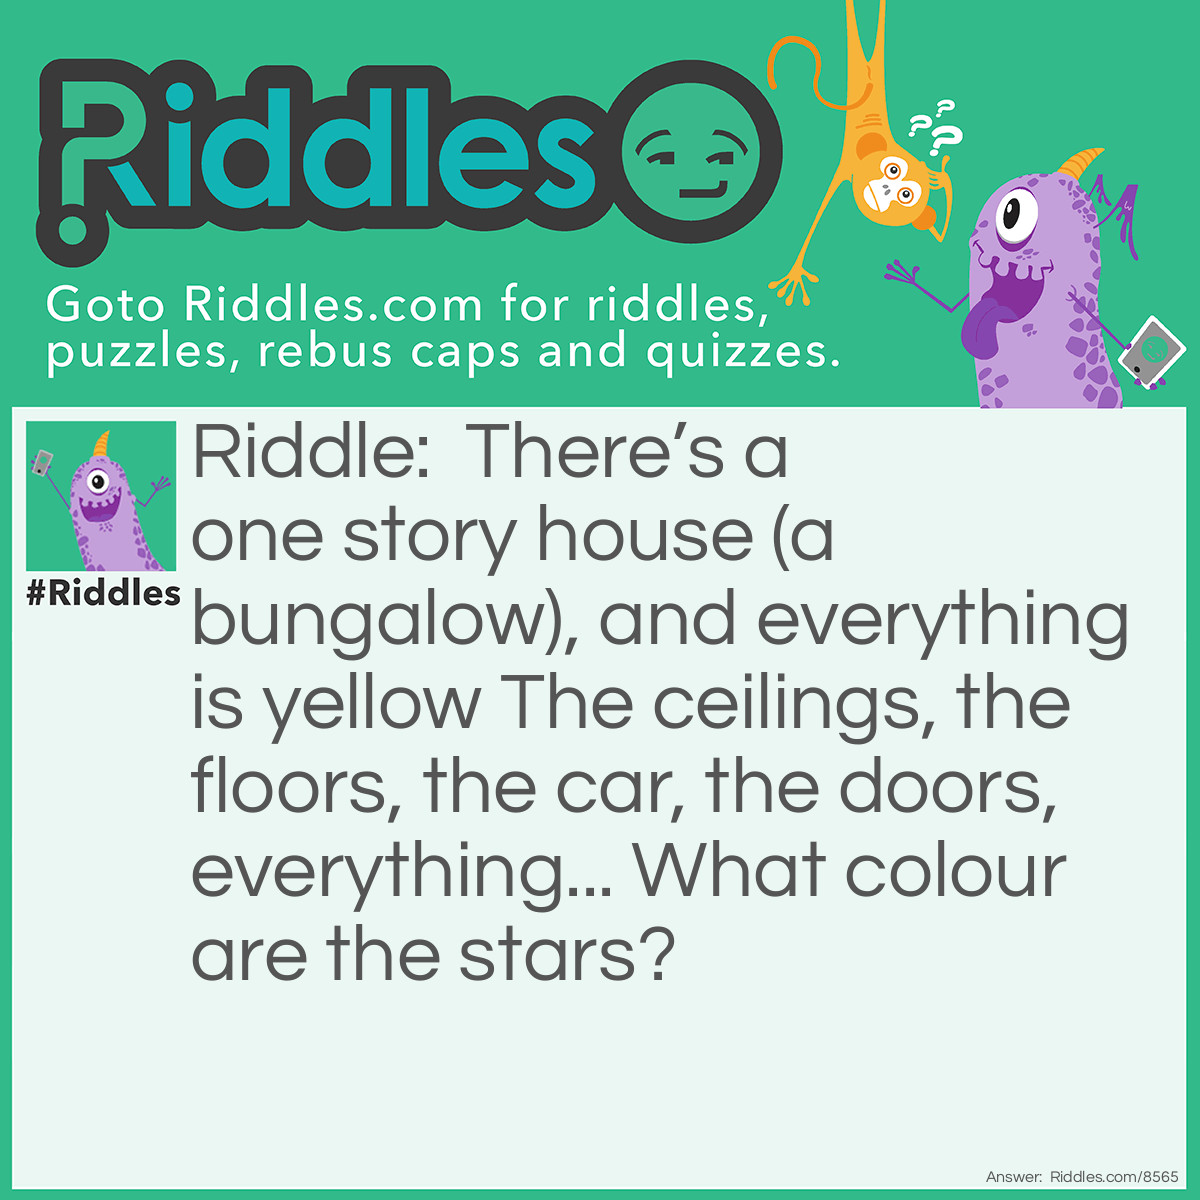 Riddle: There's a one story house (a bungalow), and everything is yellow The ceilings, the floors, the car, the doors, everything... What colour are the stars? Answer: A bungalow has no stairs.